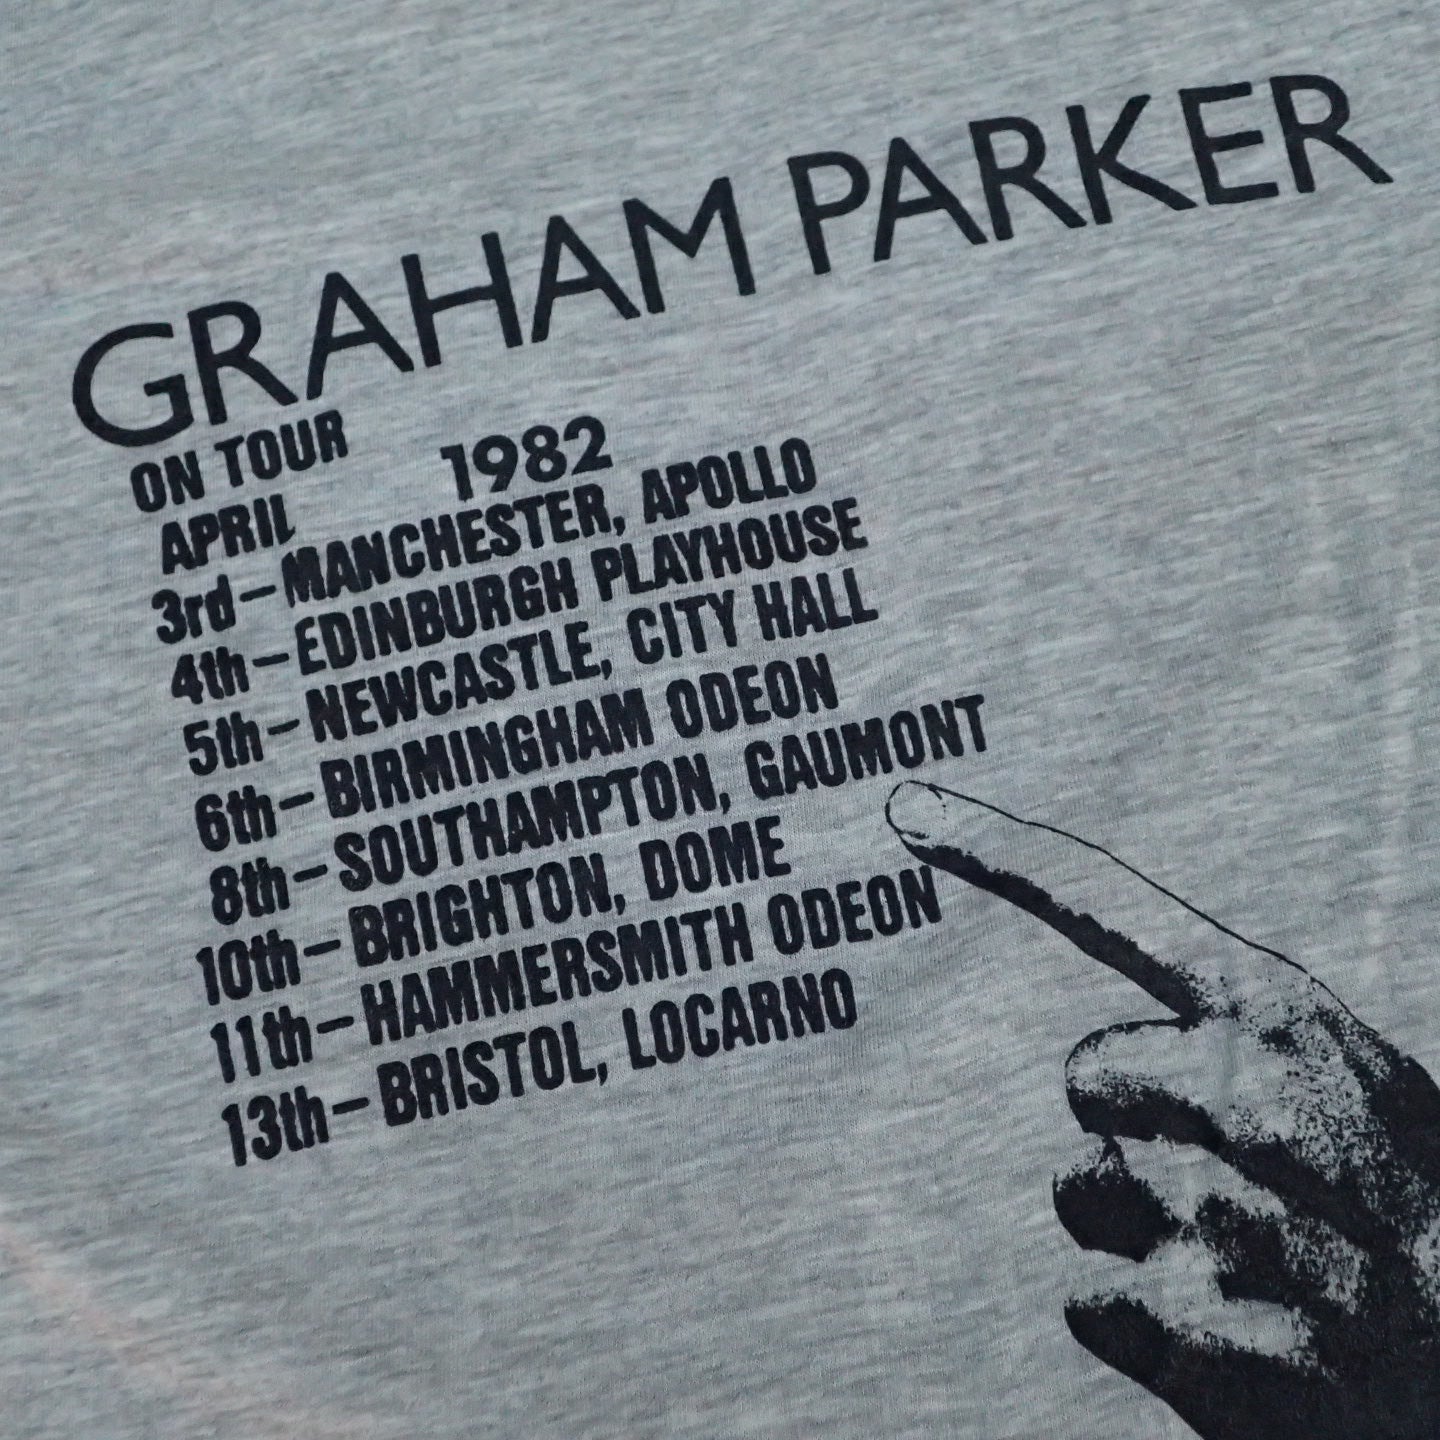 80s Graham Parker " Another Gray Area Tee"